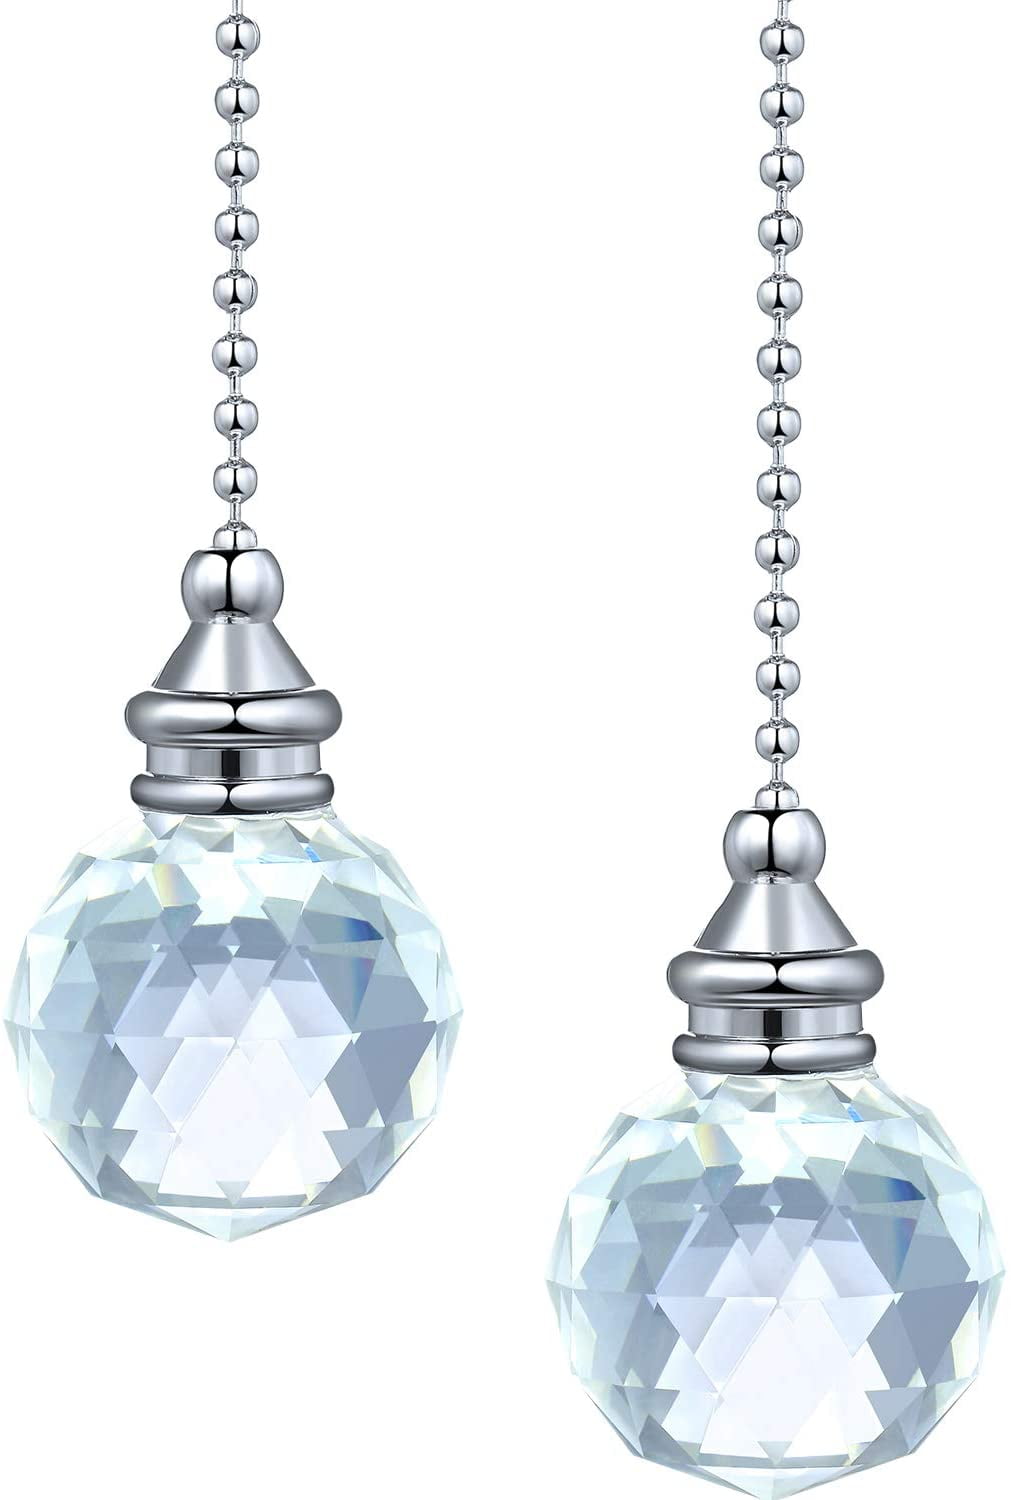 2Pack Clear Crystal Light Pull Chain Extension with Connector Ball Chain Beaded Pull Chain Crystal for Ceiling Light Fan Chain Bathroom Toilet Switch Fan Pull Chain Cord Chrome,1Meter Long Each Chain 